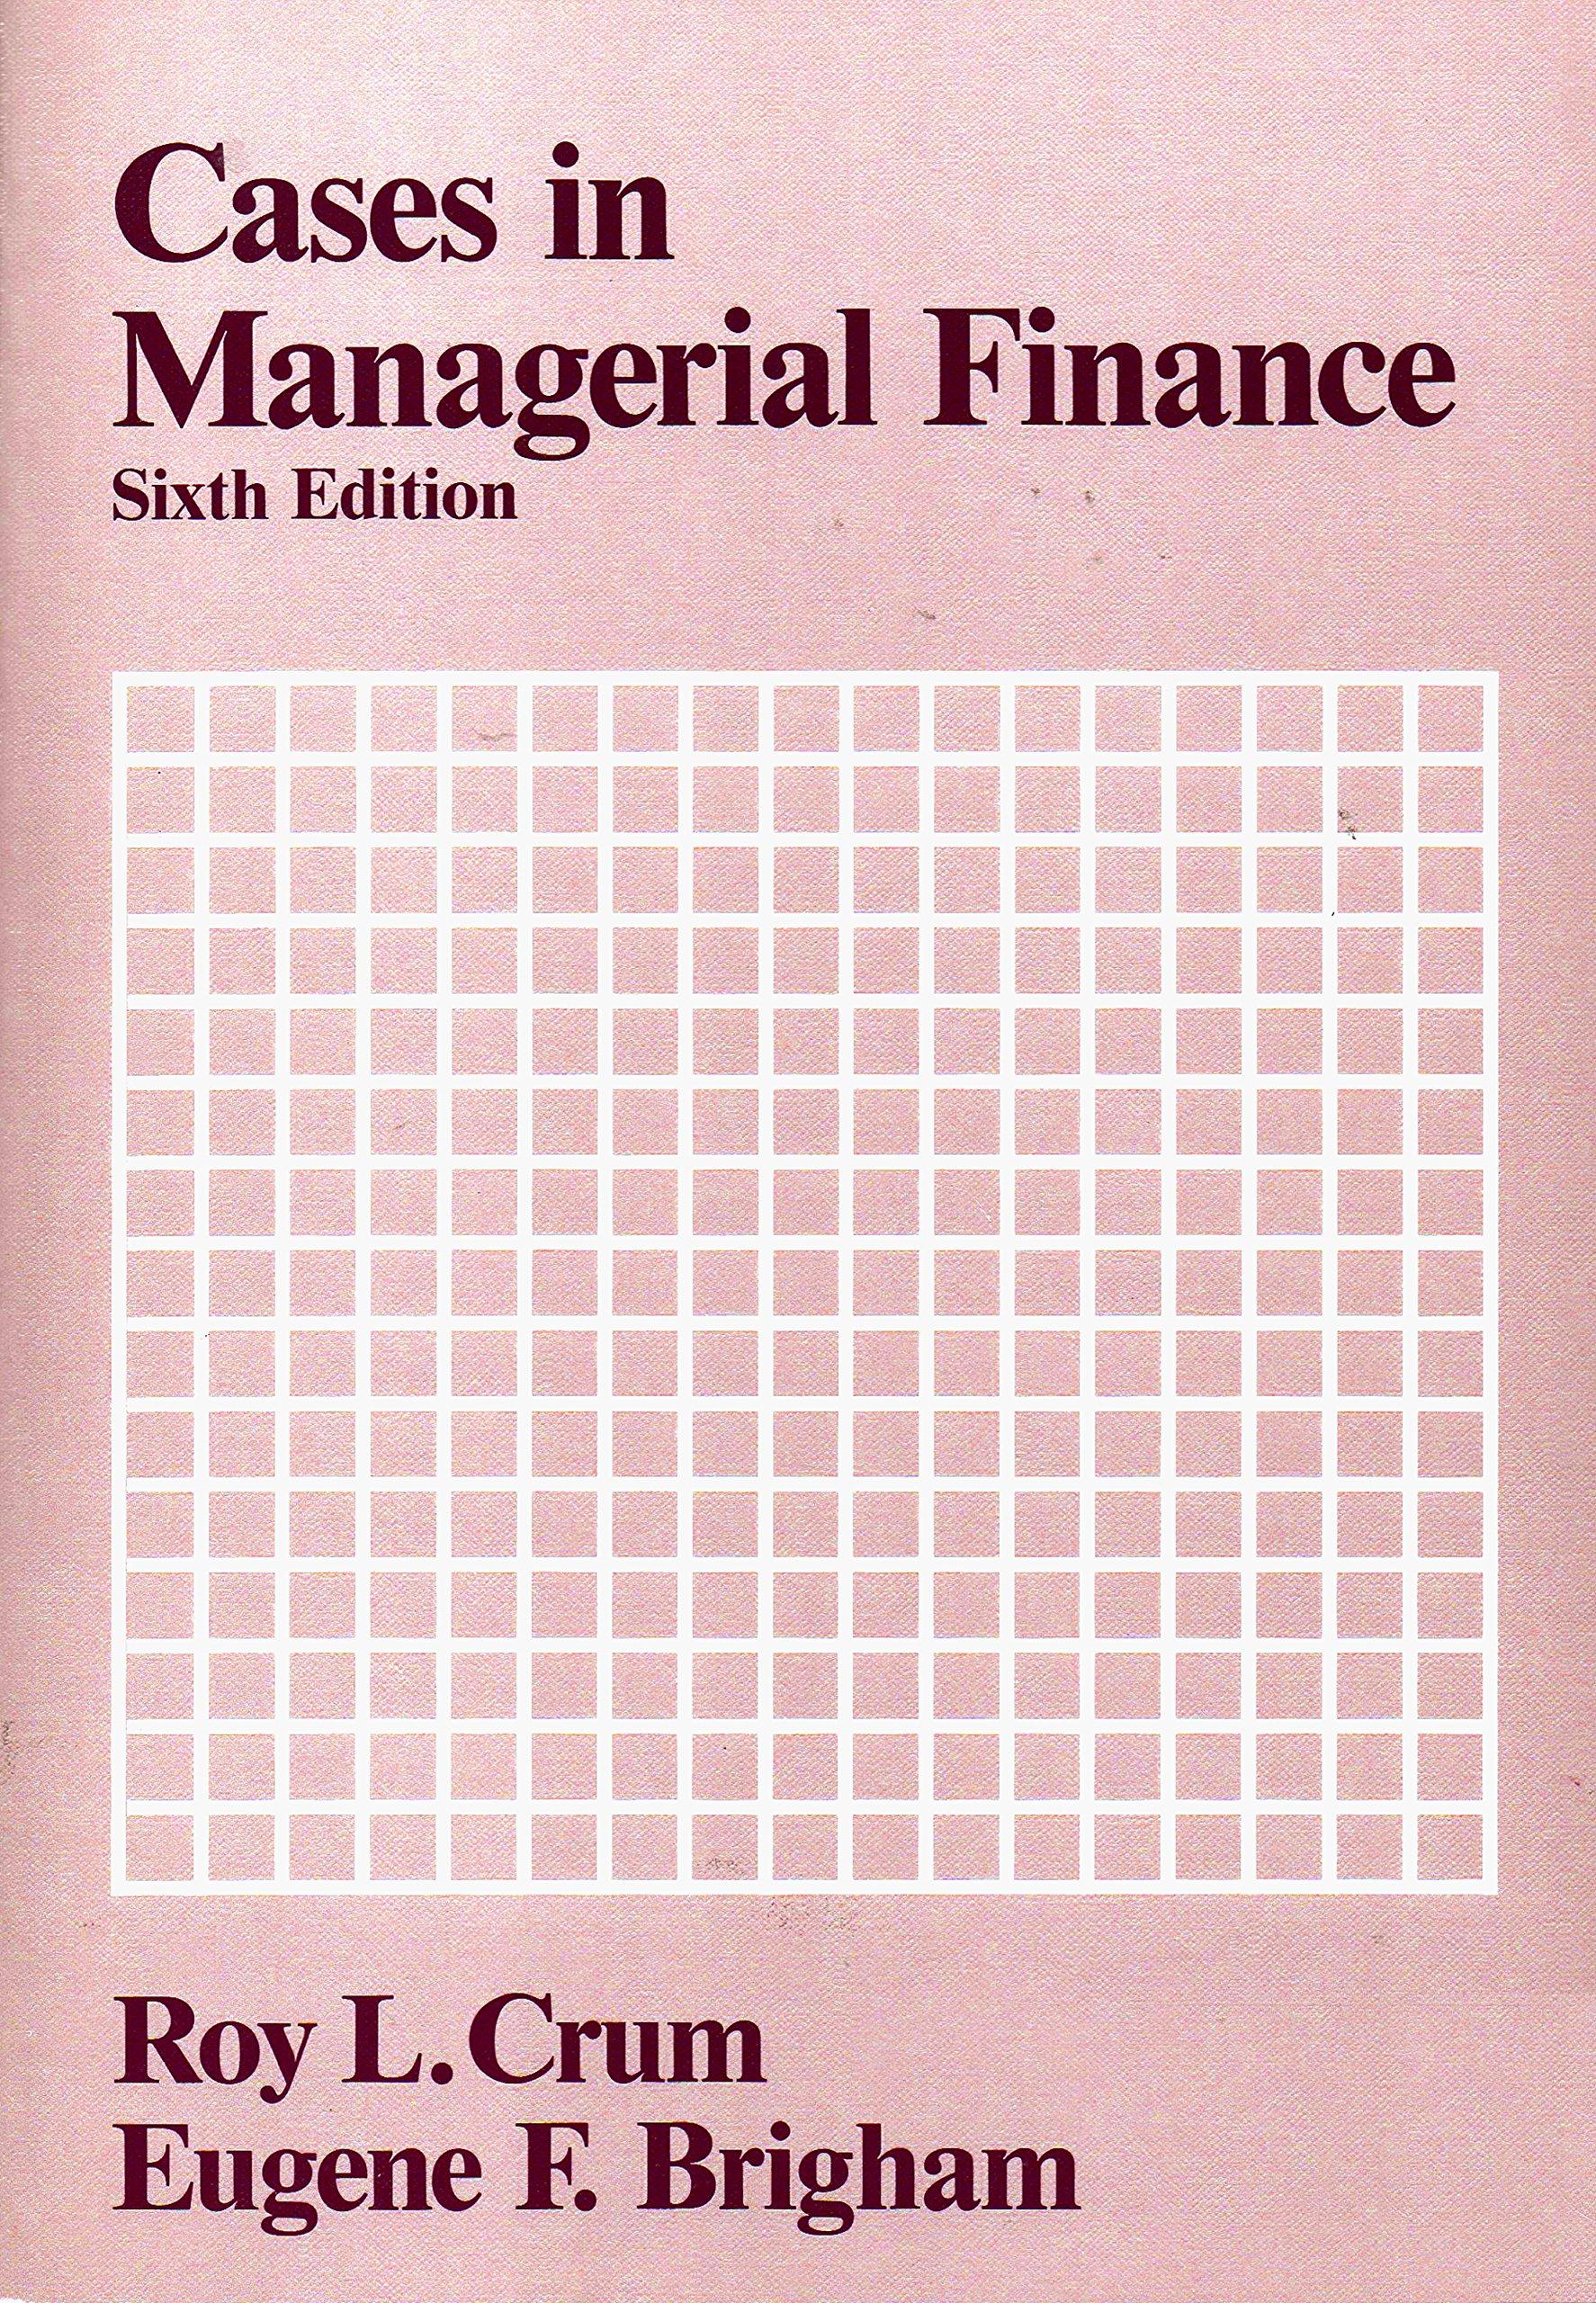 cases in managerial finance 6th edition eugene f. brigham, roy l. crum 0030048672, 978-0030048678